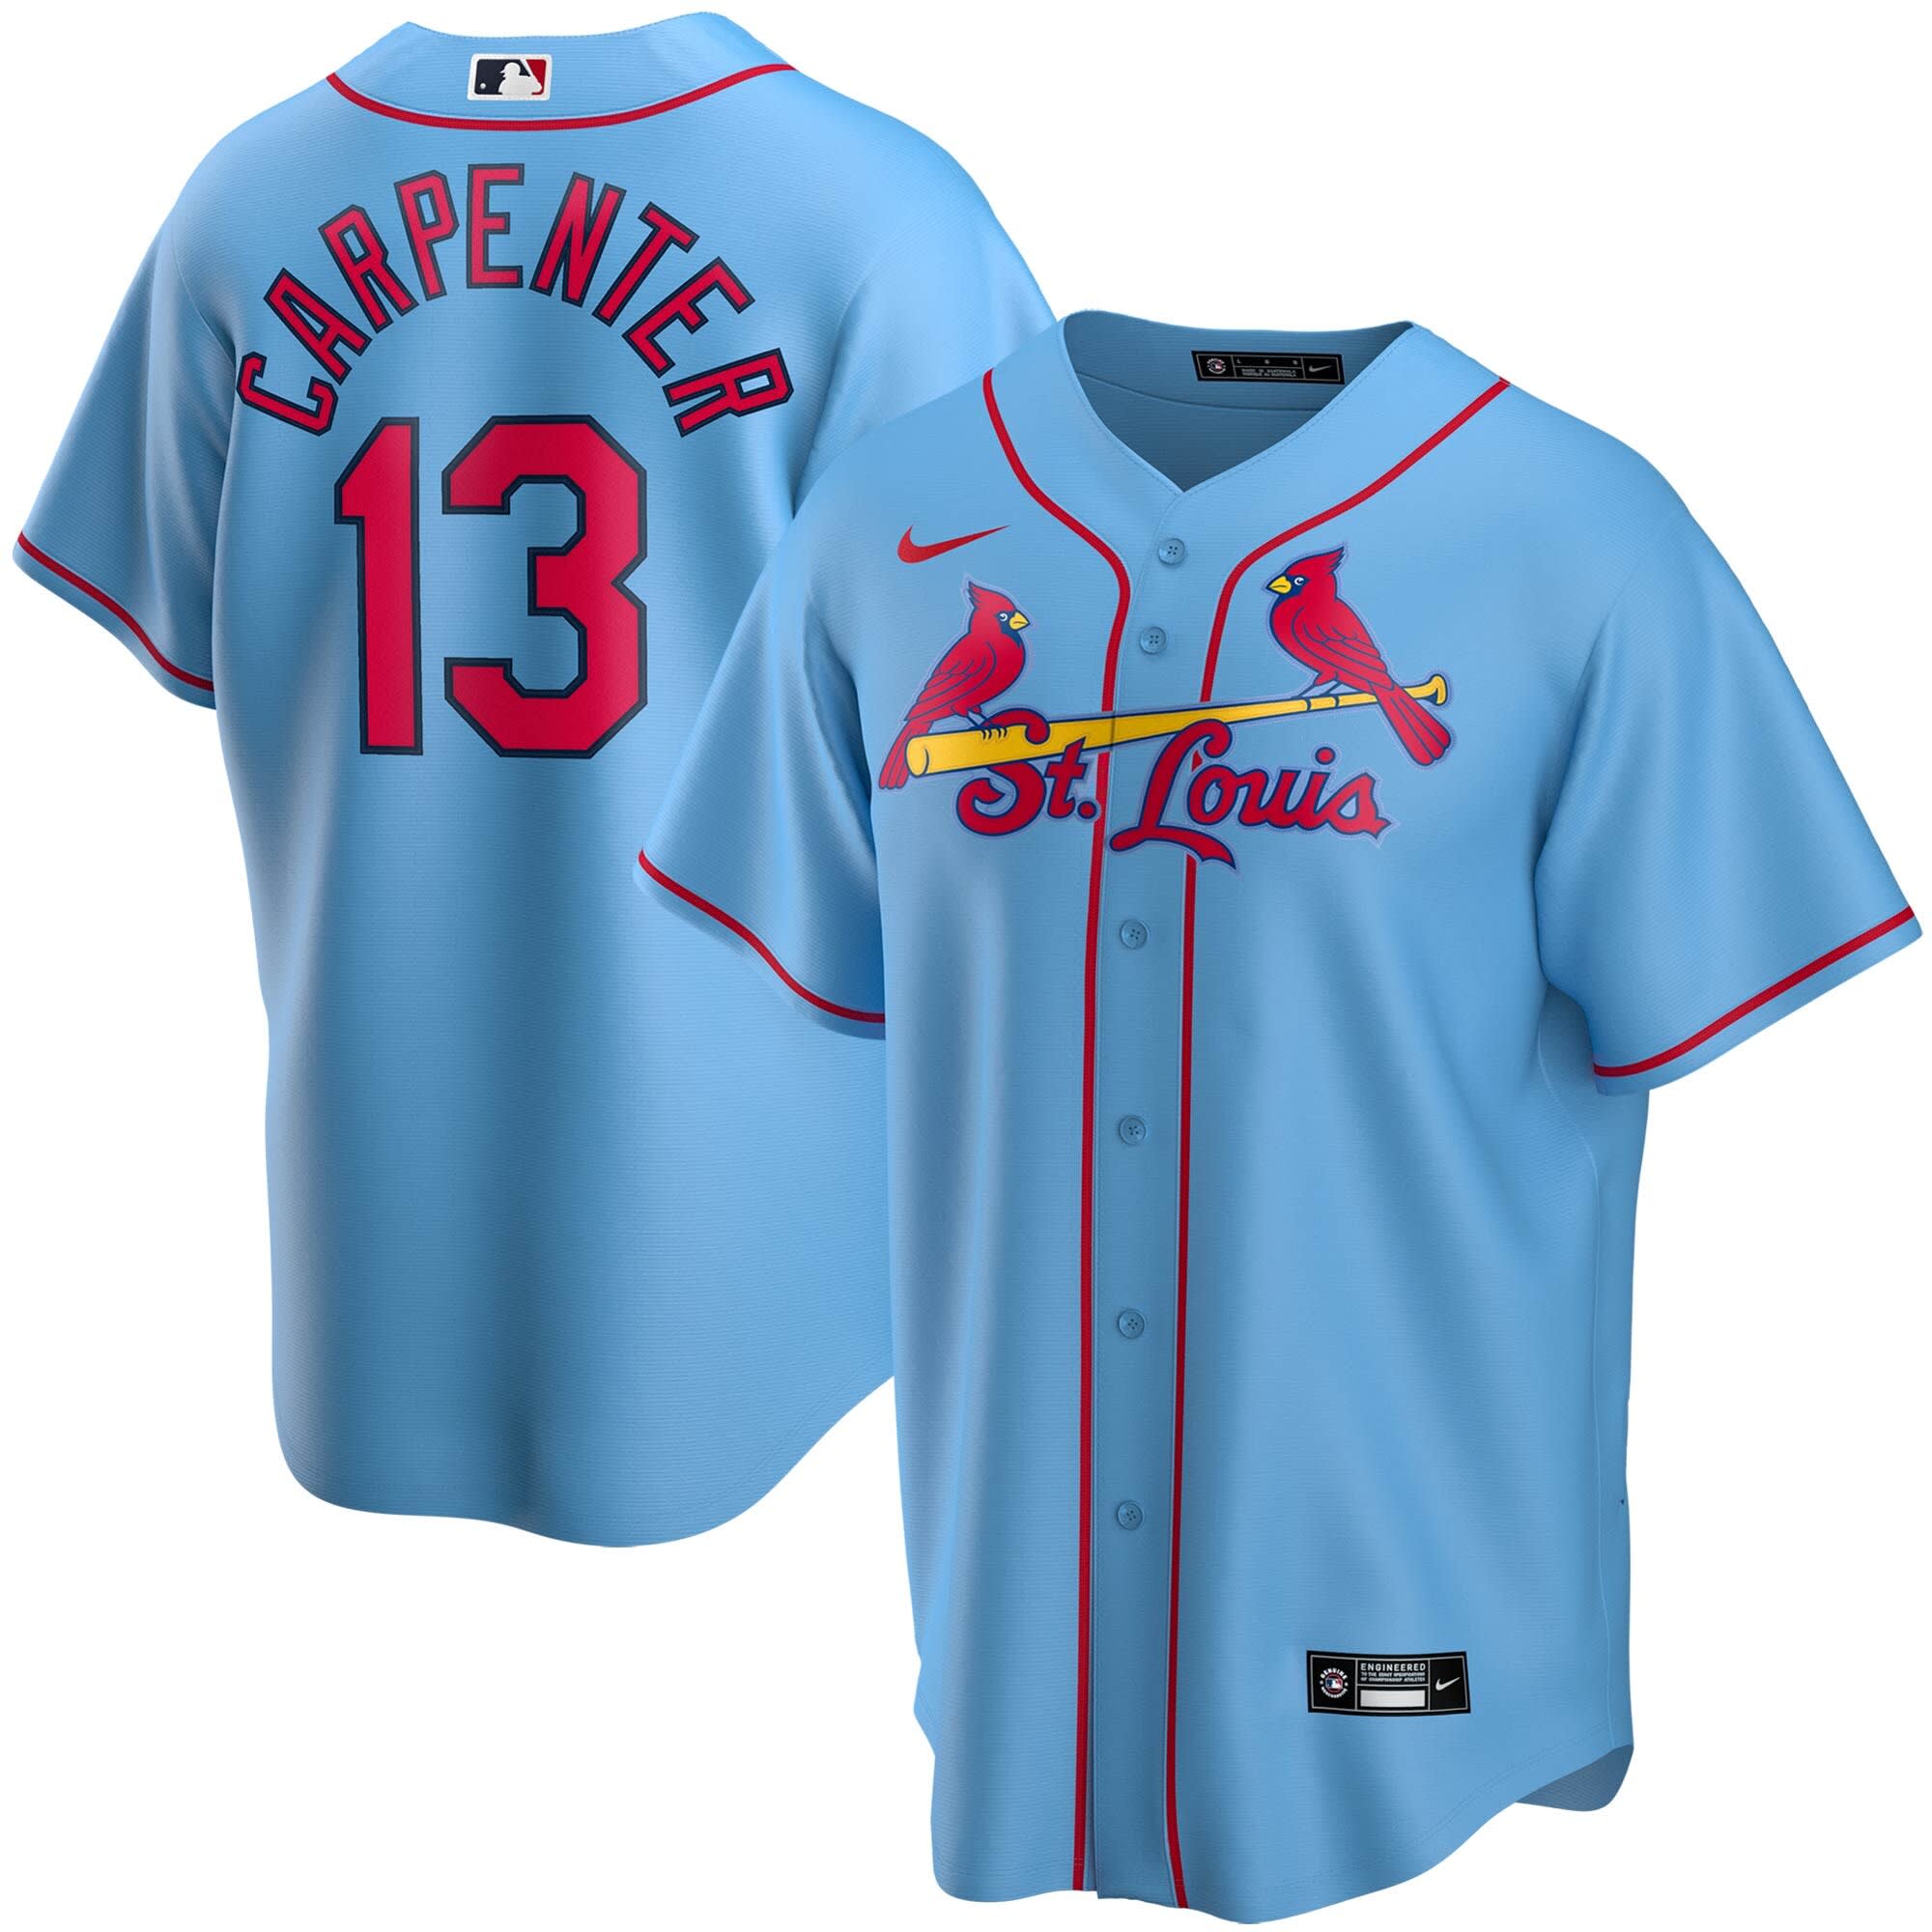 MLB is back! Save 25% on St. Louis Cardinals jerseys